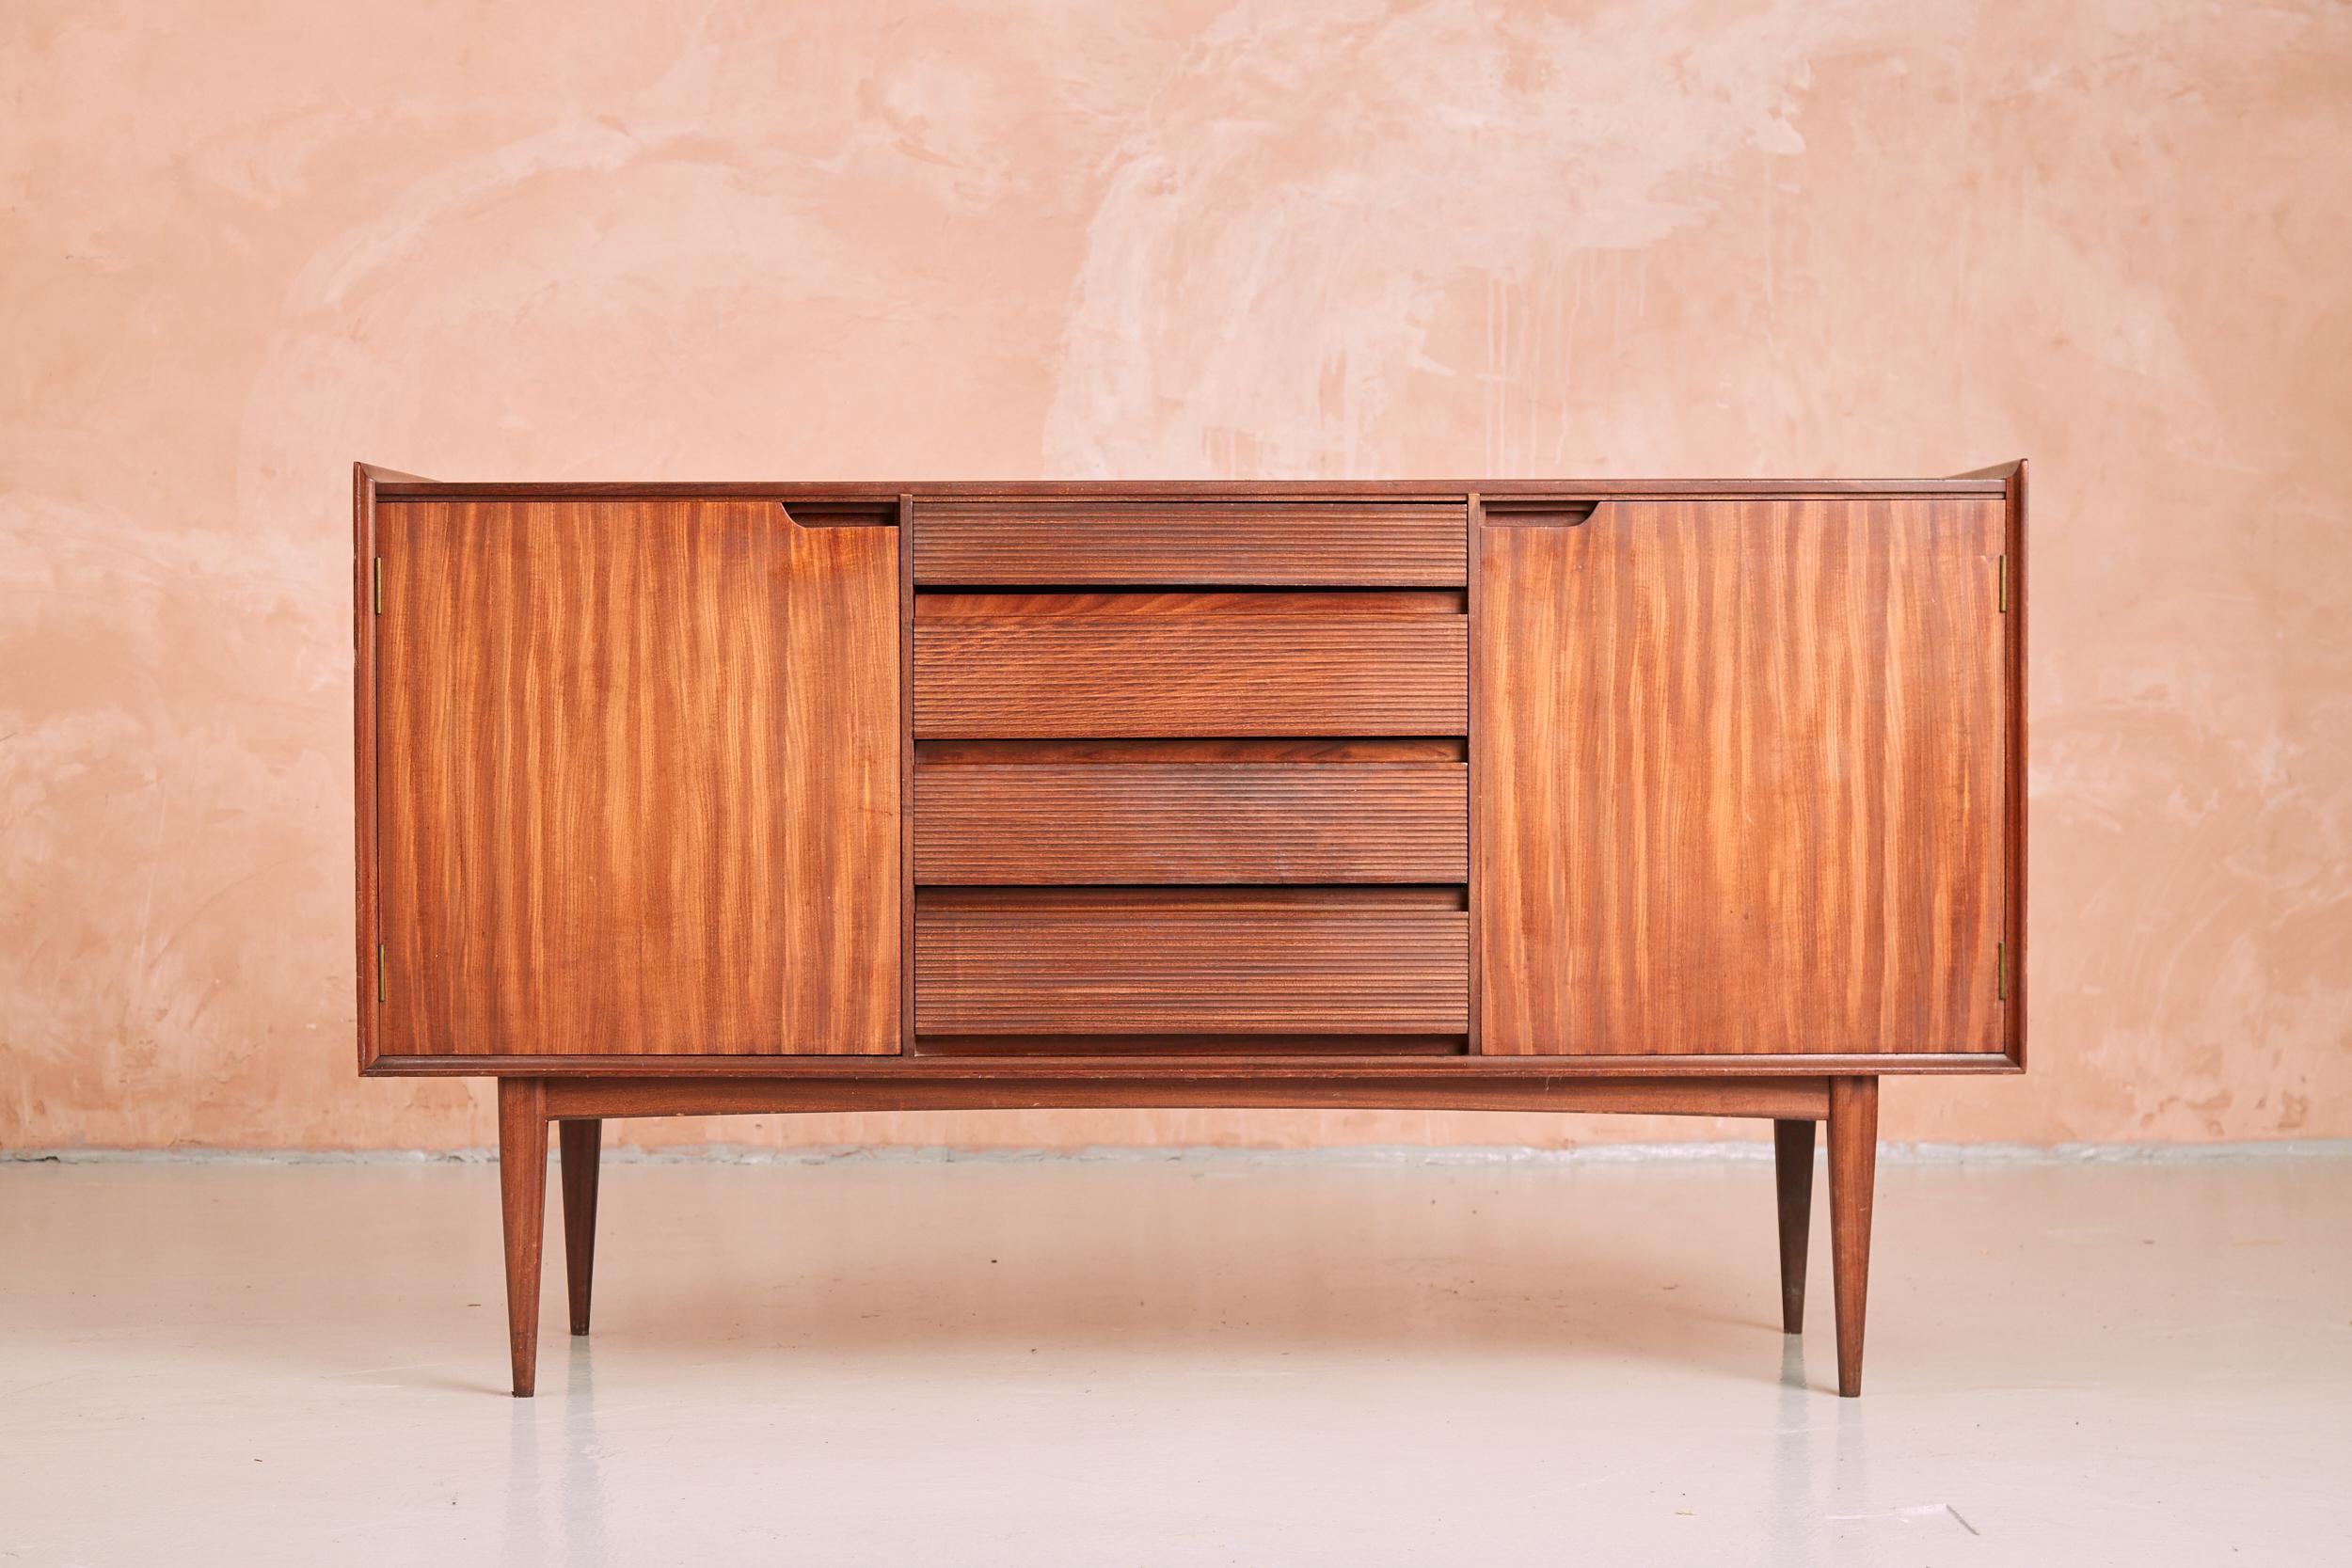 An exquisite and rare vintage credenza / sideboard by Richard Hornby for Fyne Ladye. The sideboard's rigid and square front is broken up by stylish ribbed drawers in the central column and neat cut out finger holes for the doors. A lipped upper